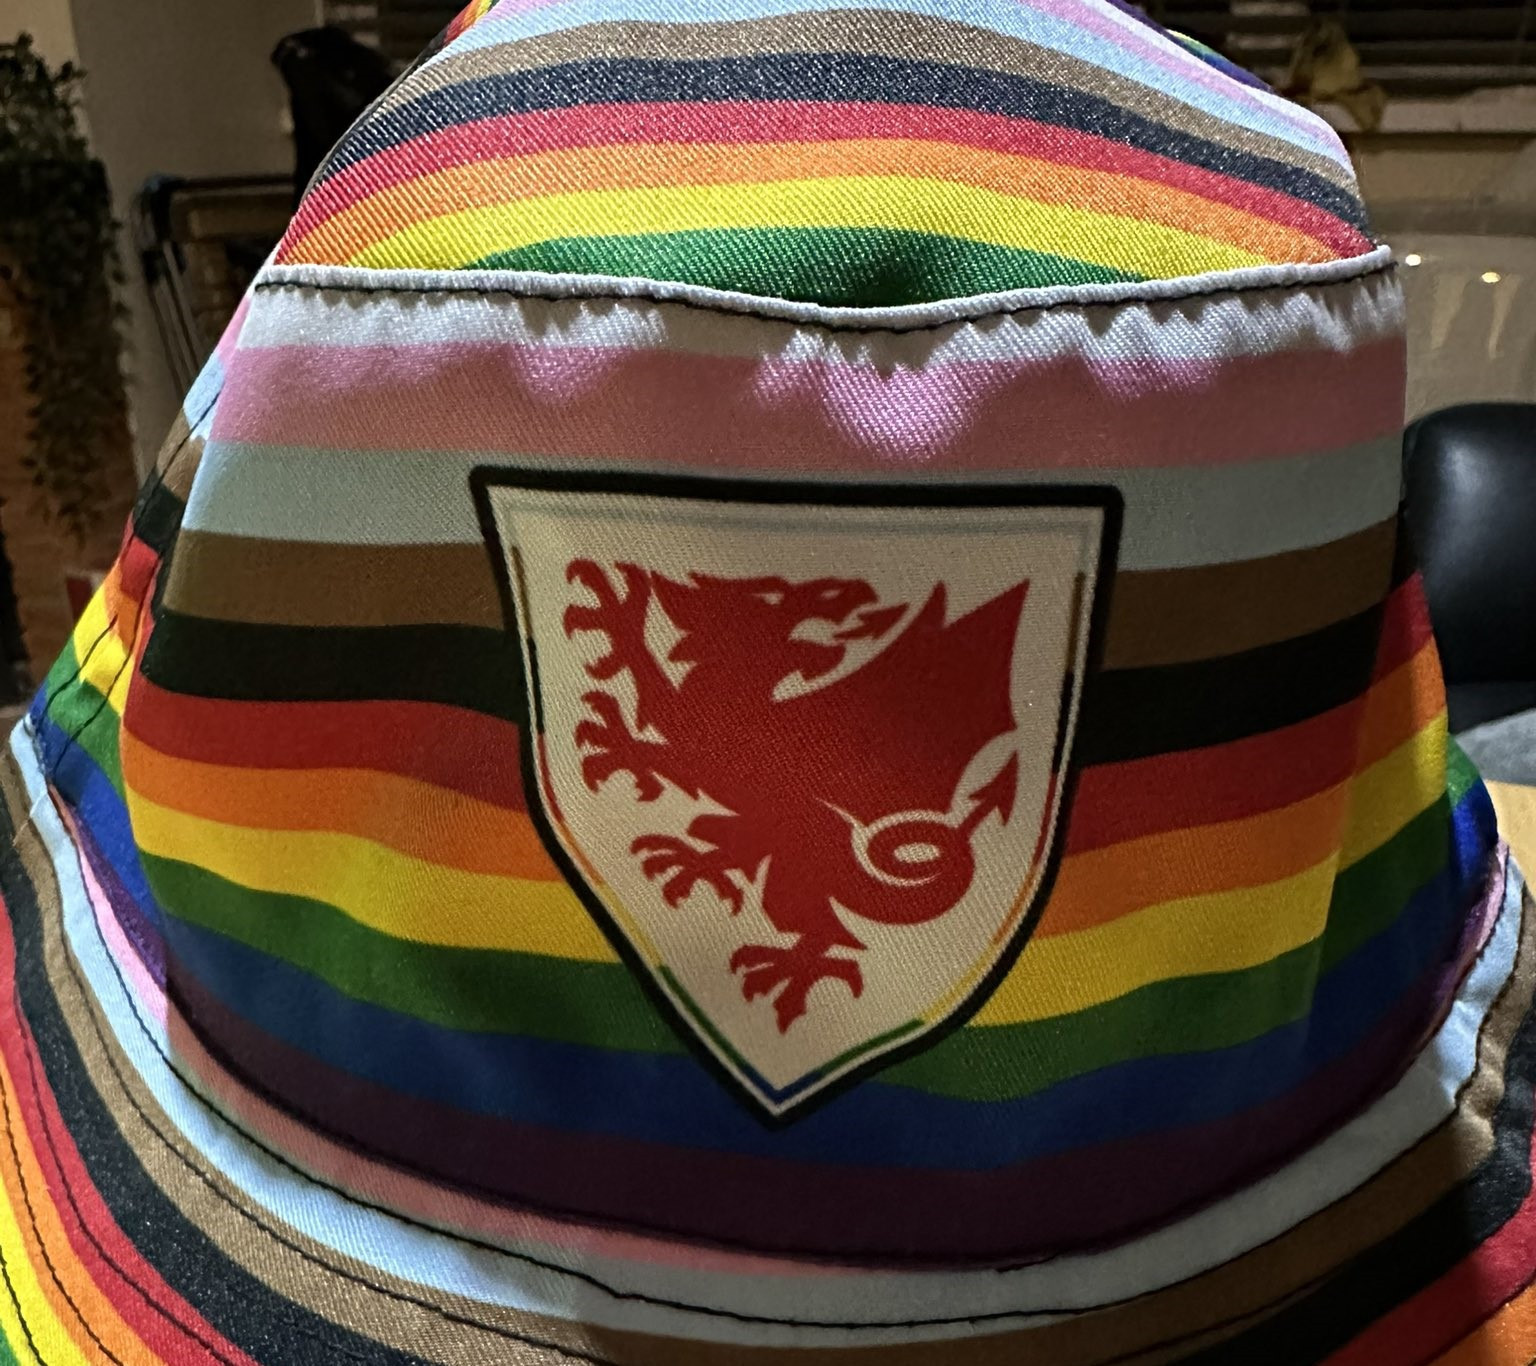 Welsh fans accused security of asking them to remove their rainbow hats before the match against the United States ©Twitter/The Rainbow Wall